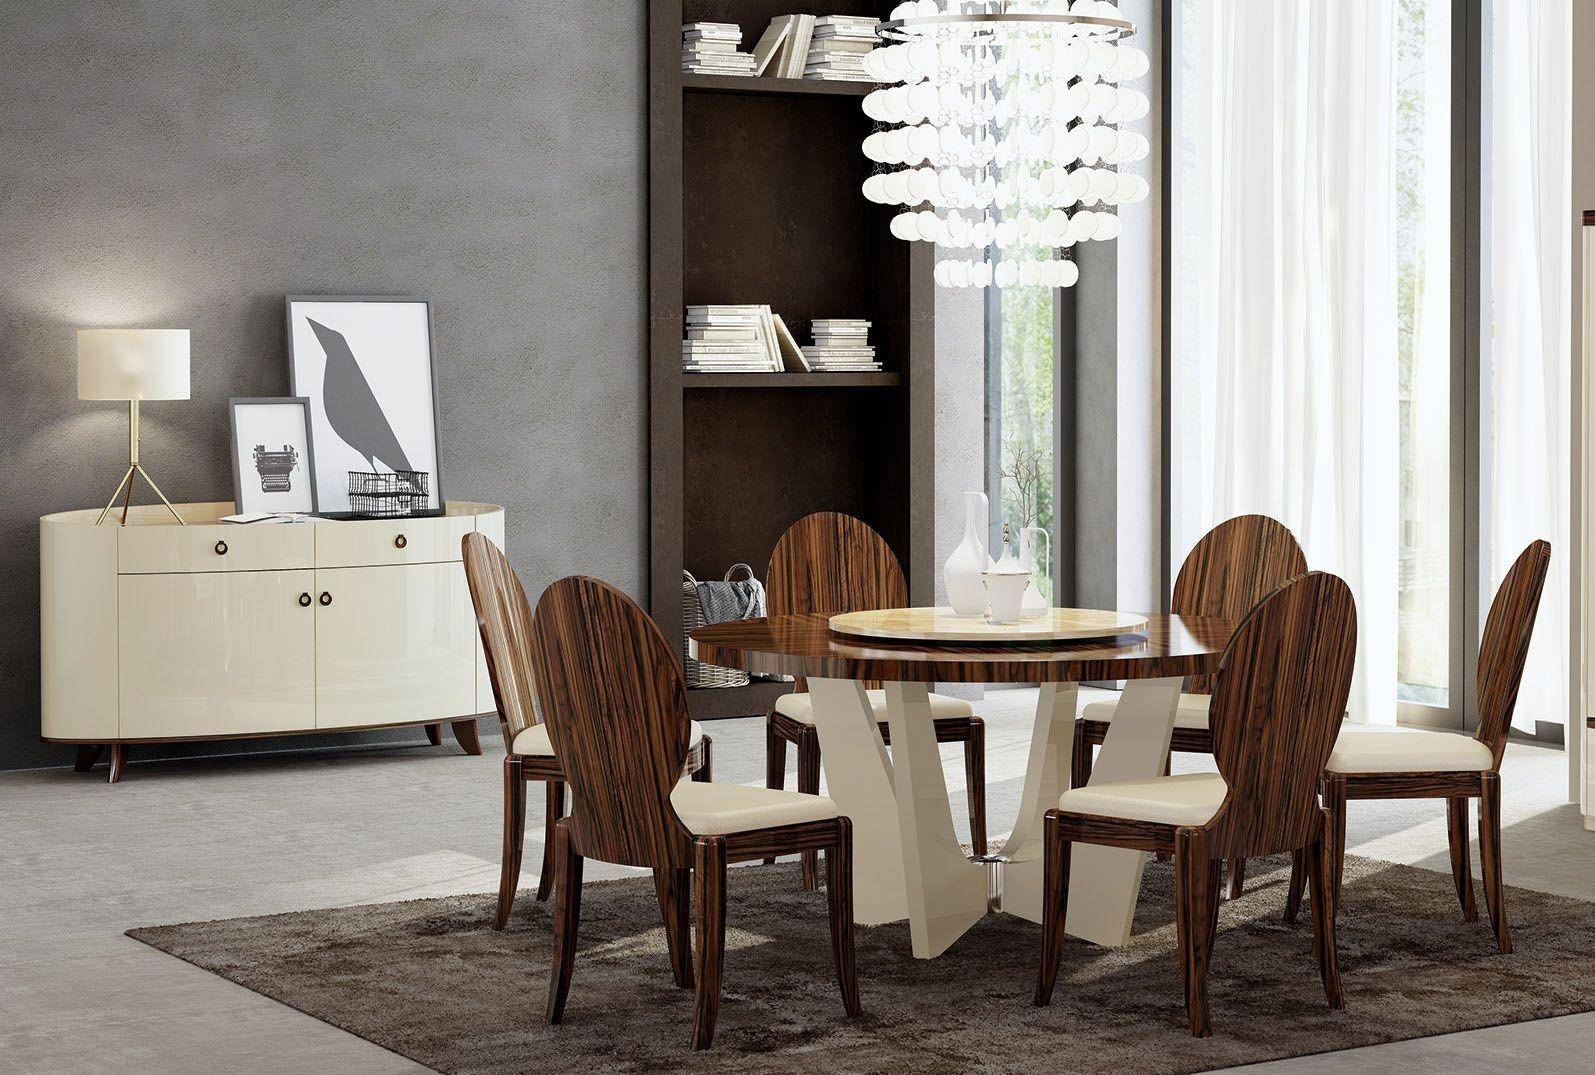 American Eagle P101 Dt Dining Sets, Round Dining Room Table Sets For 8